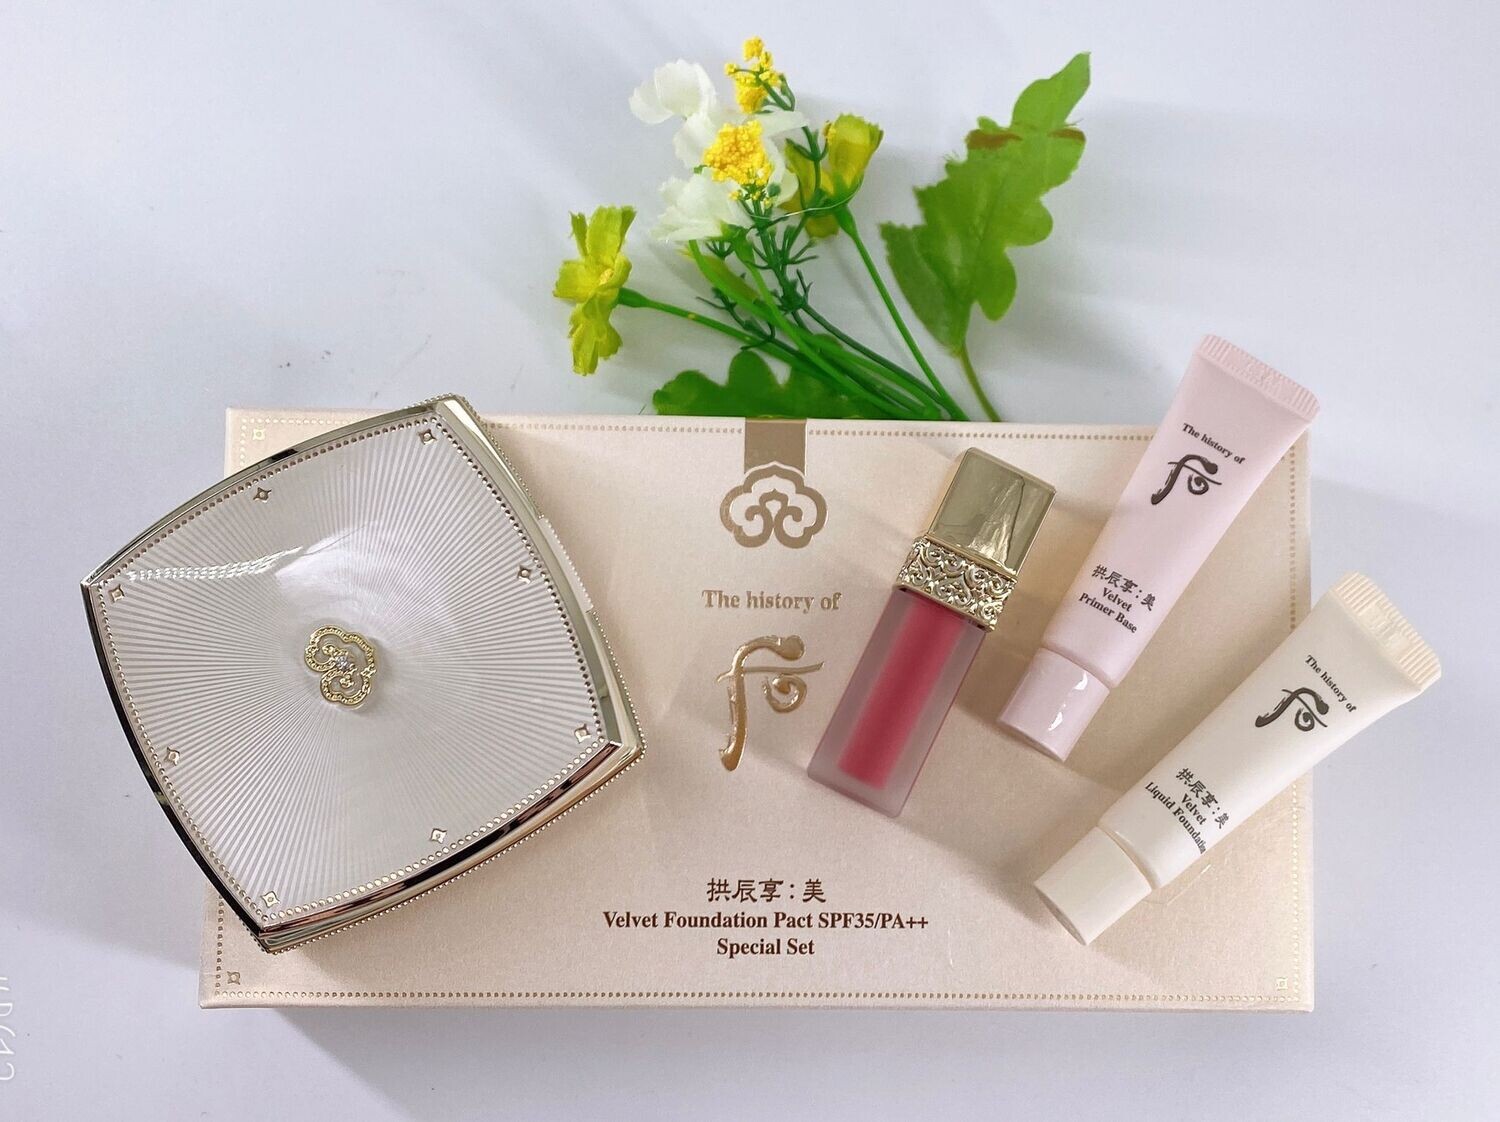 THE HISTORY OF WHOO Gongjinhyang Mi Velvet Foundation Pact SPF35/PA++ Special Set